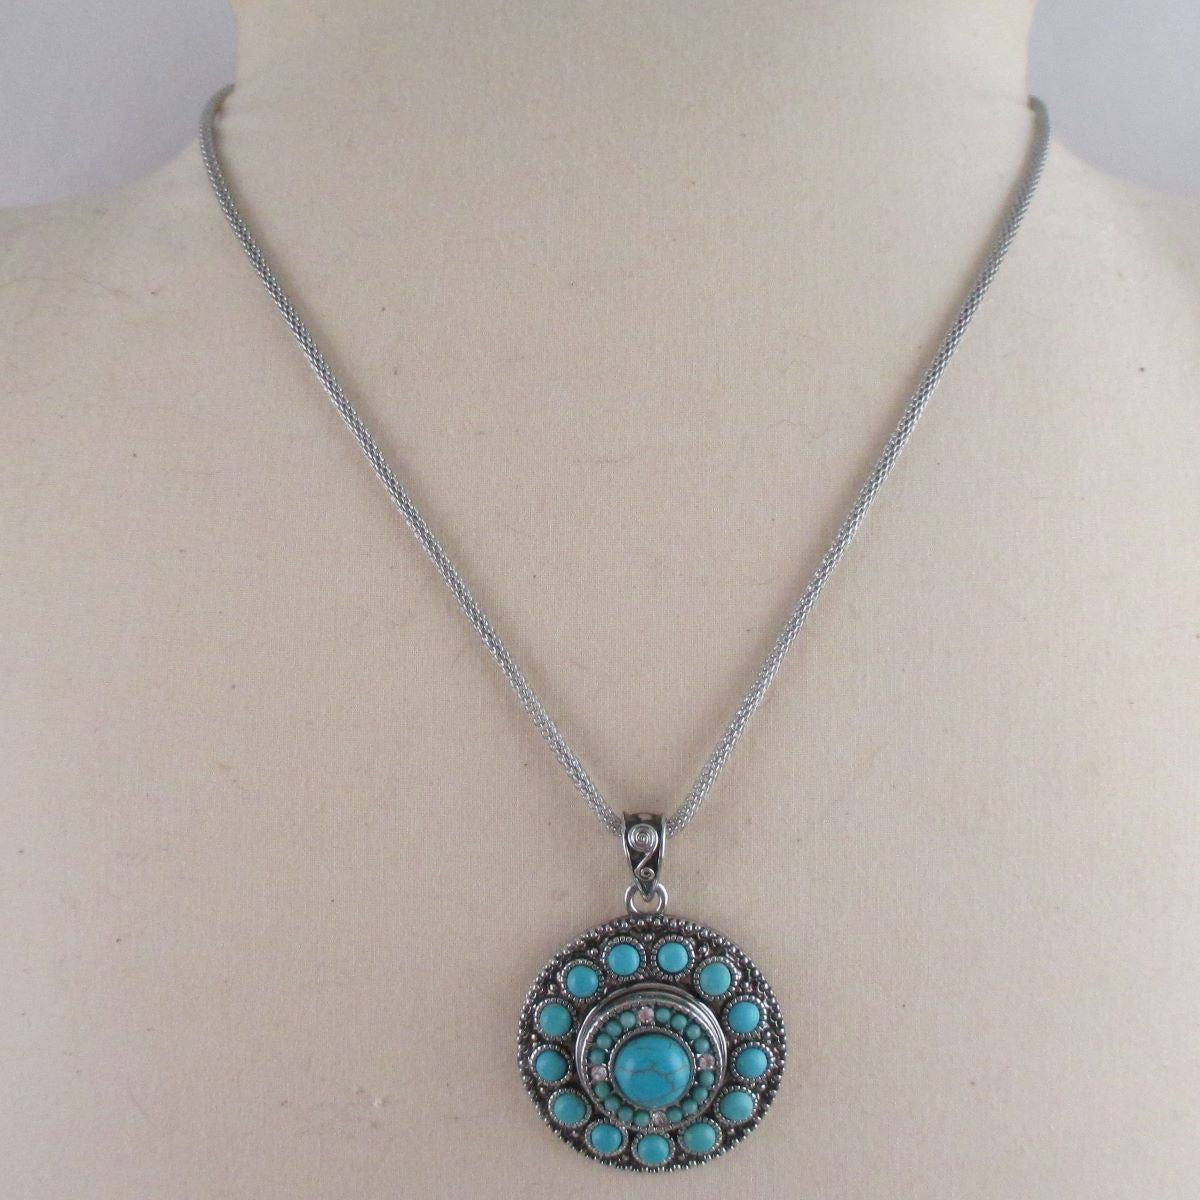 Multi-stoned Turquoise & Silver Pendant Necklace - VP's Jewelry